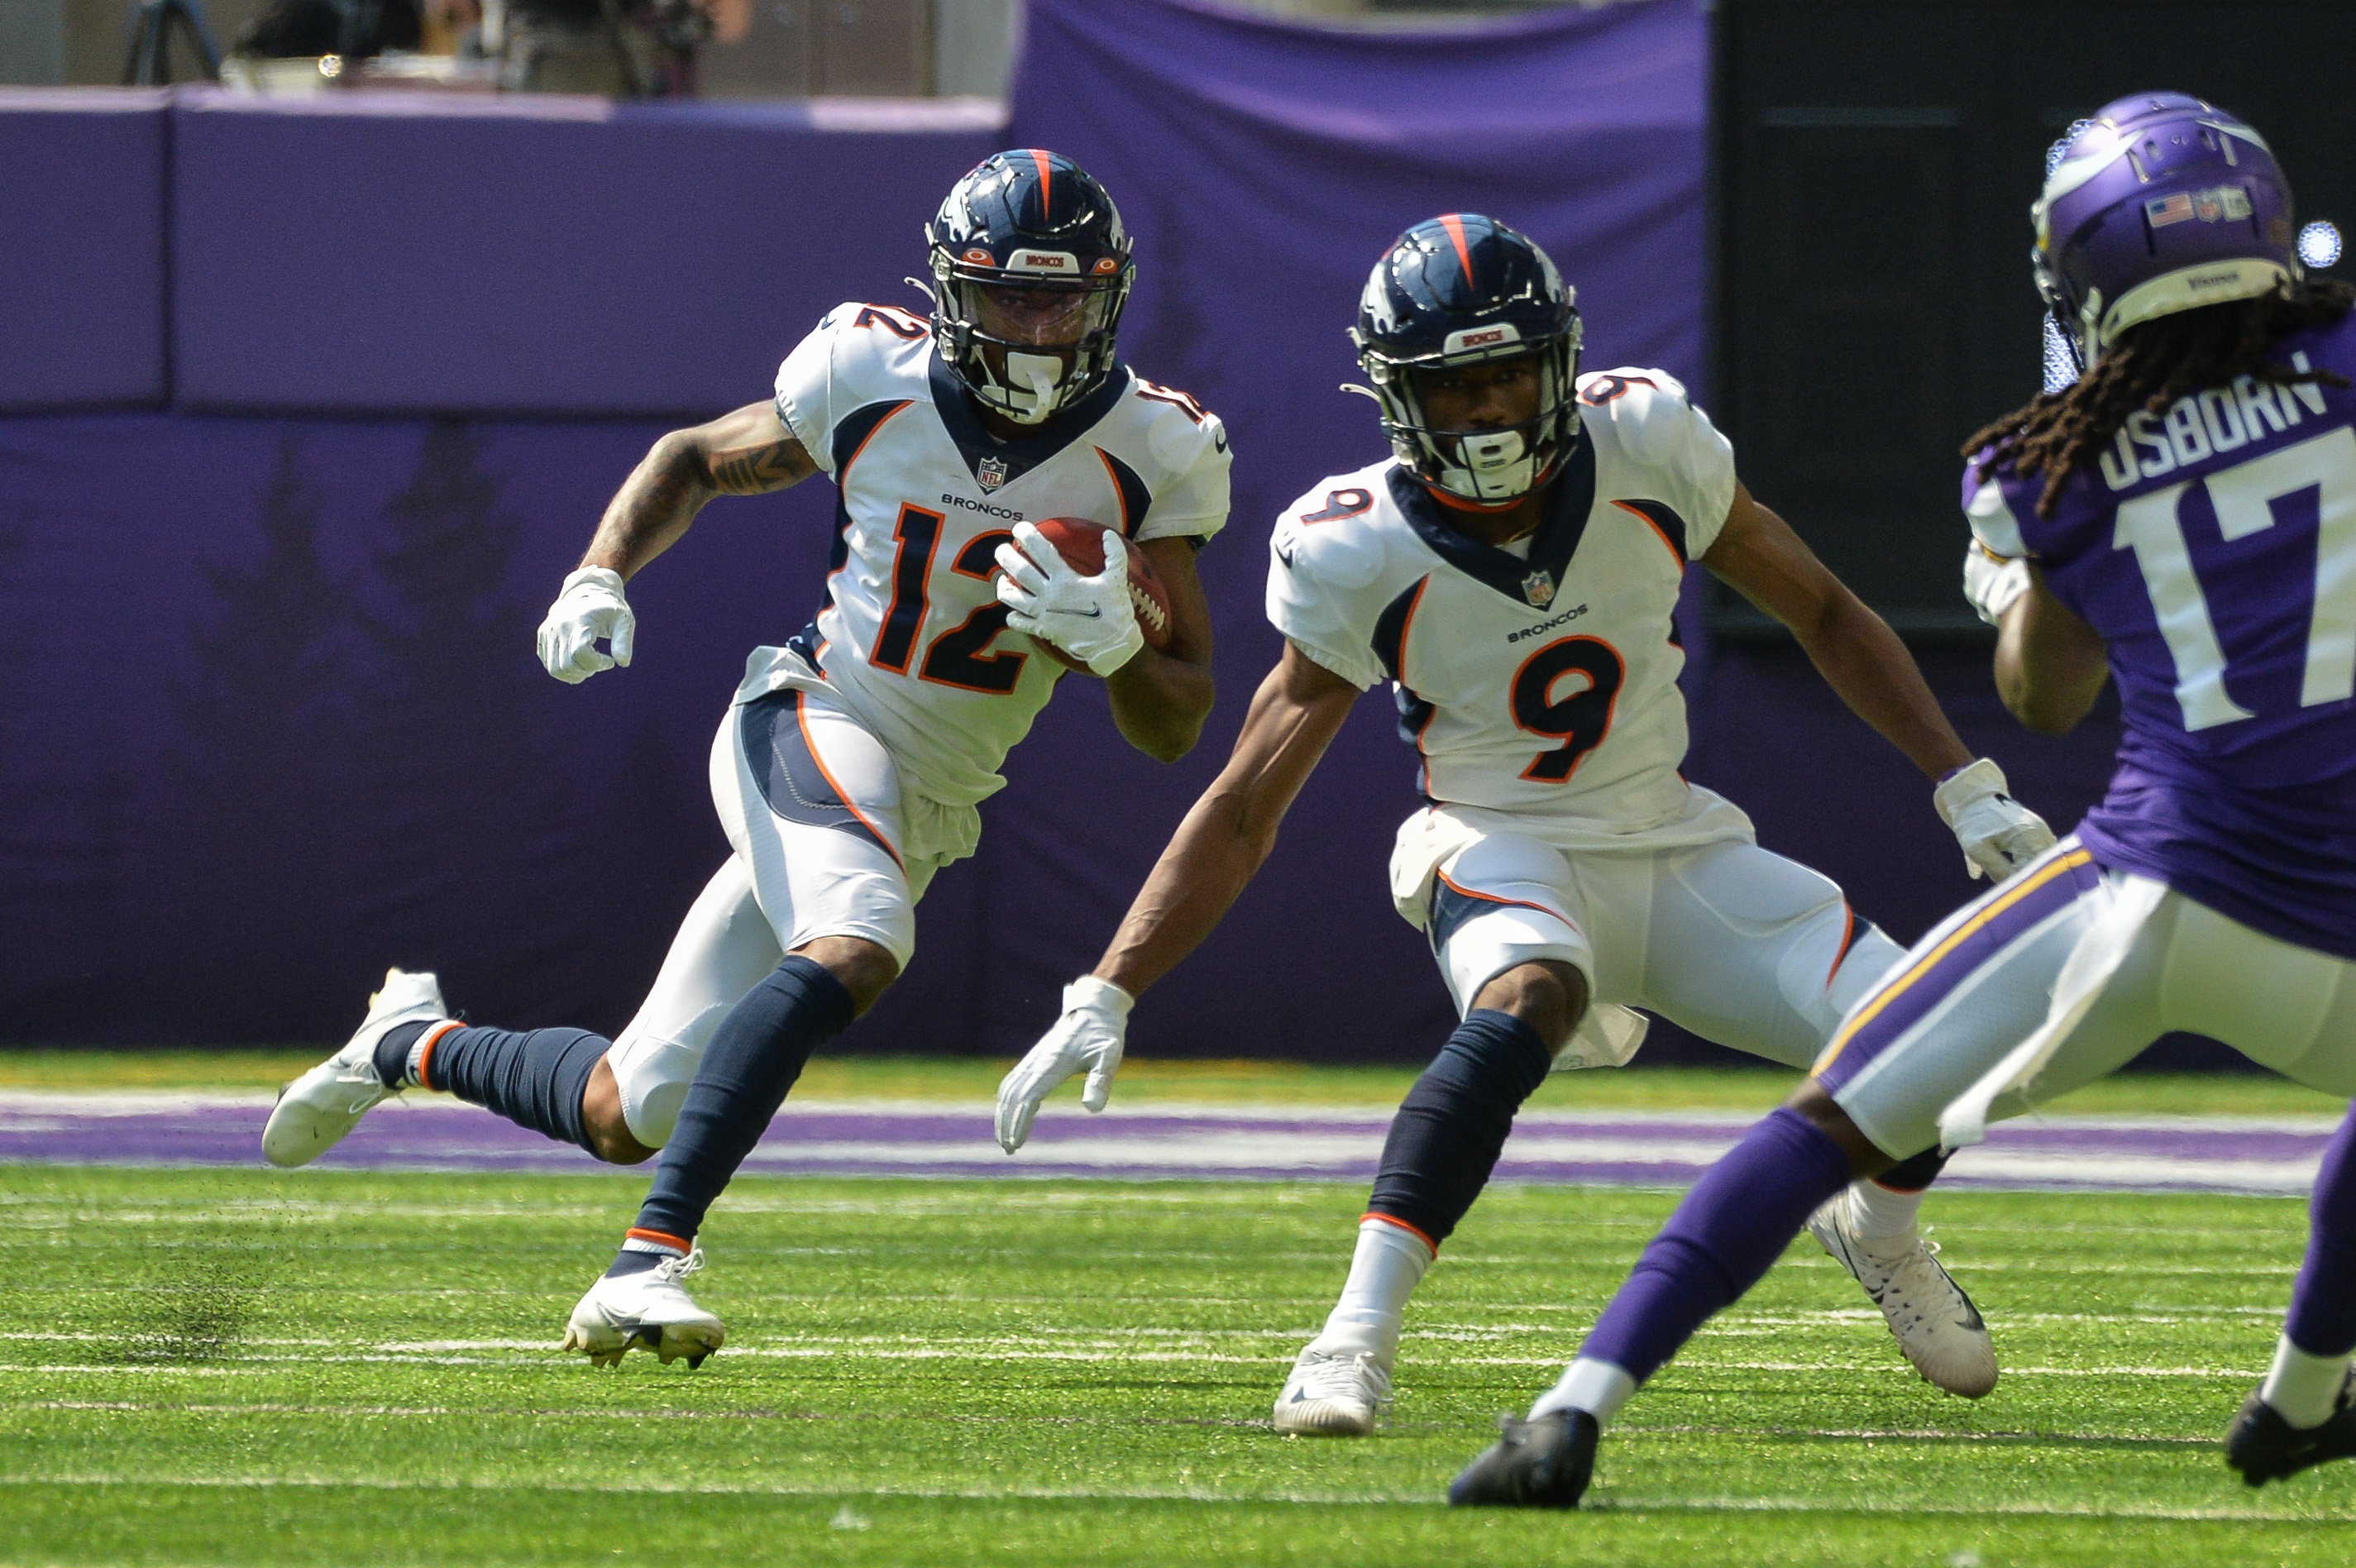 Denver Broncos wide receiver Trinity Benson (12) runs the ball as wide receiver Kendall Hinton (9) goes to block Minnesota Vikings wide receiver K.J. Osborn (17) during the first quarter at U.S. Bank Stadium.